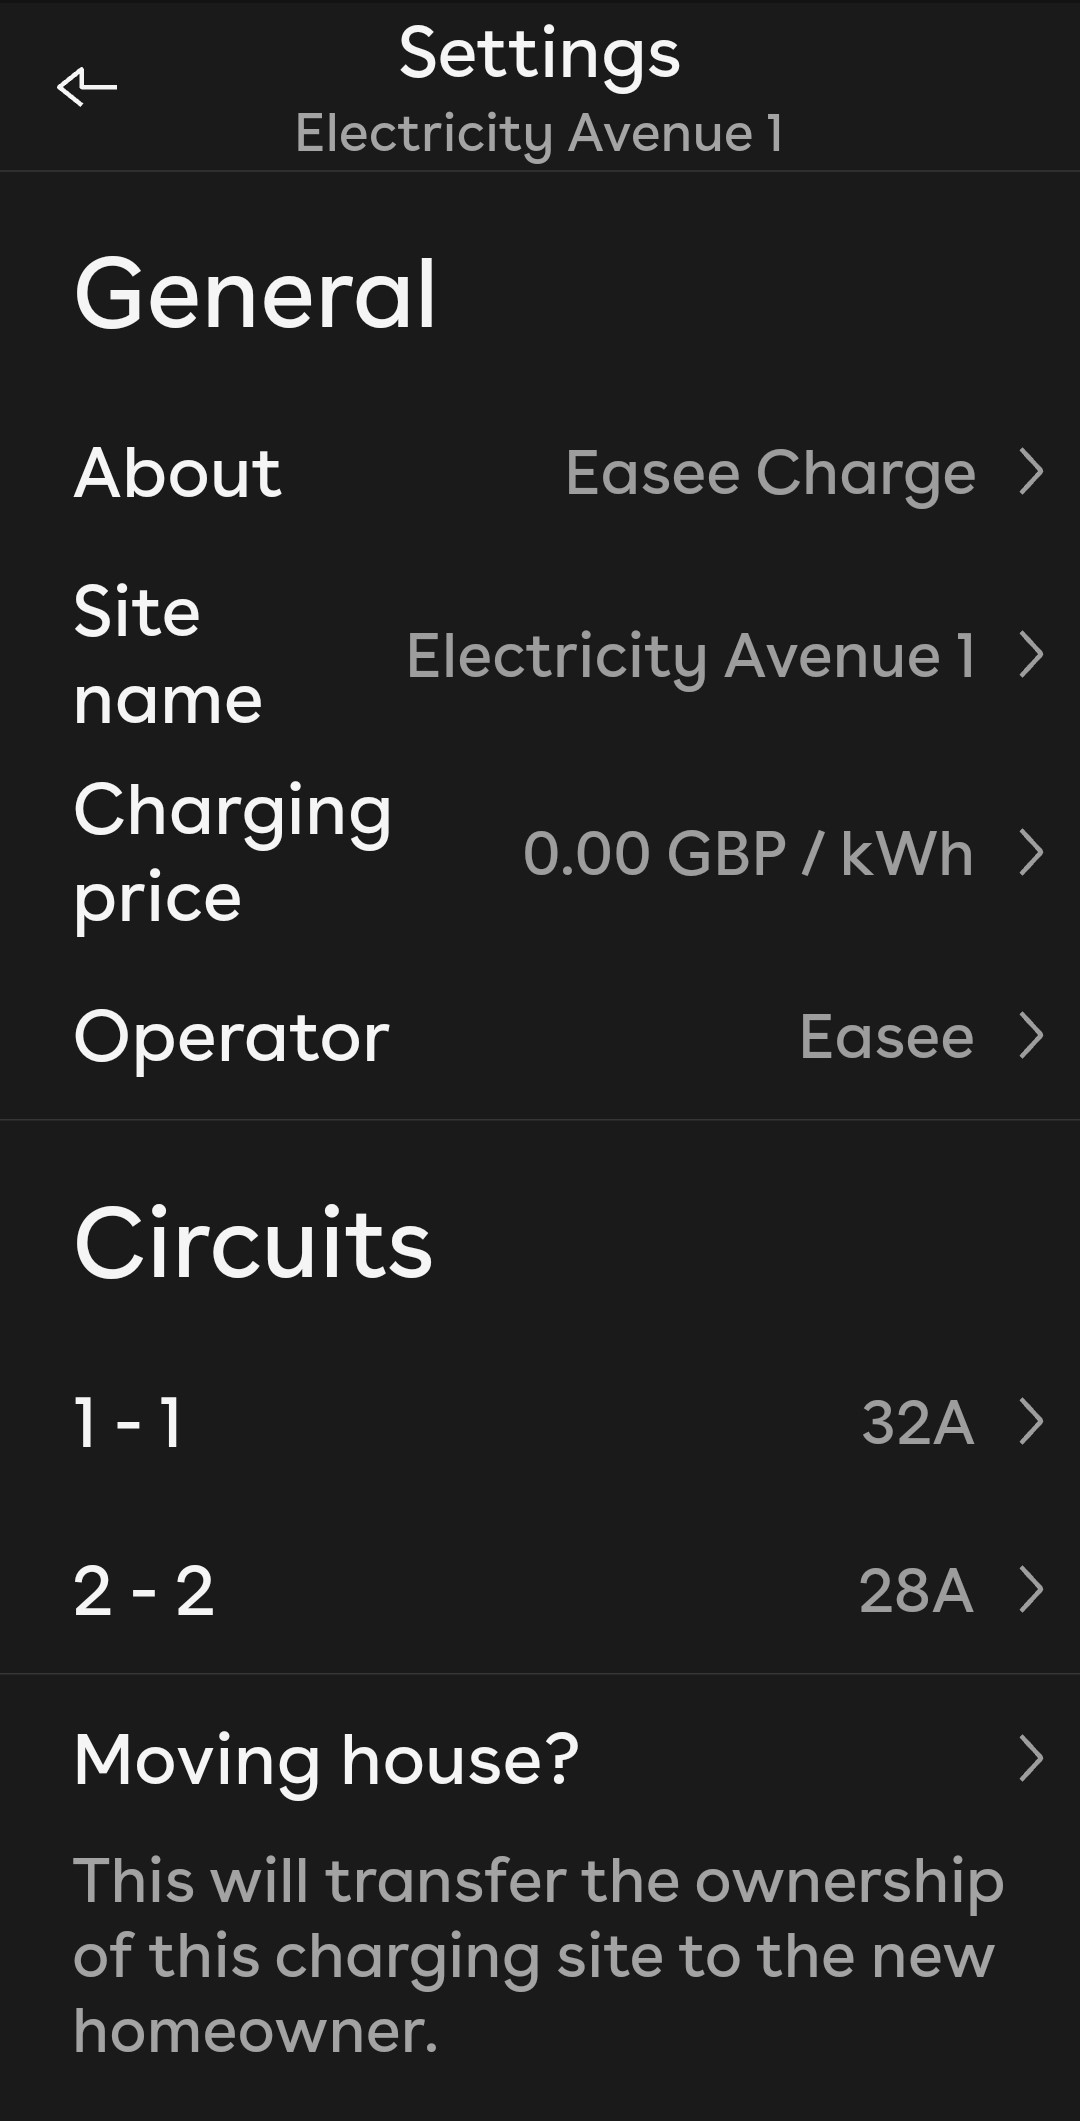 A screenshot of the general settings for a site in the Easee app.